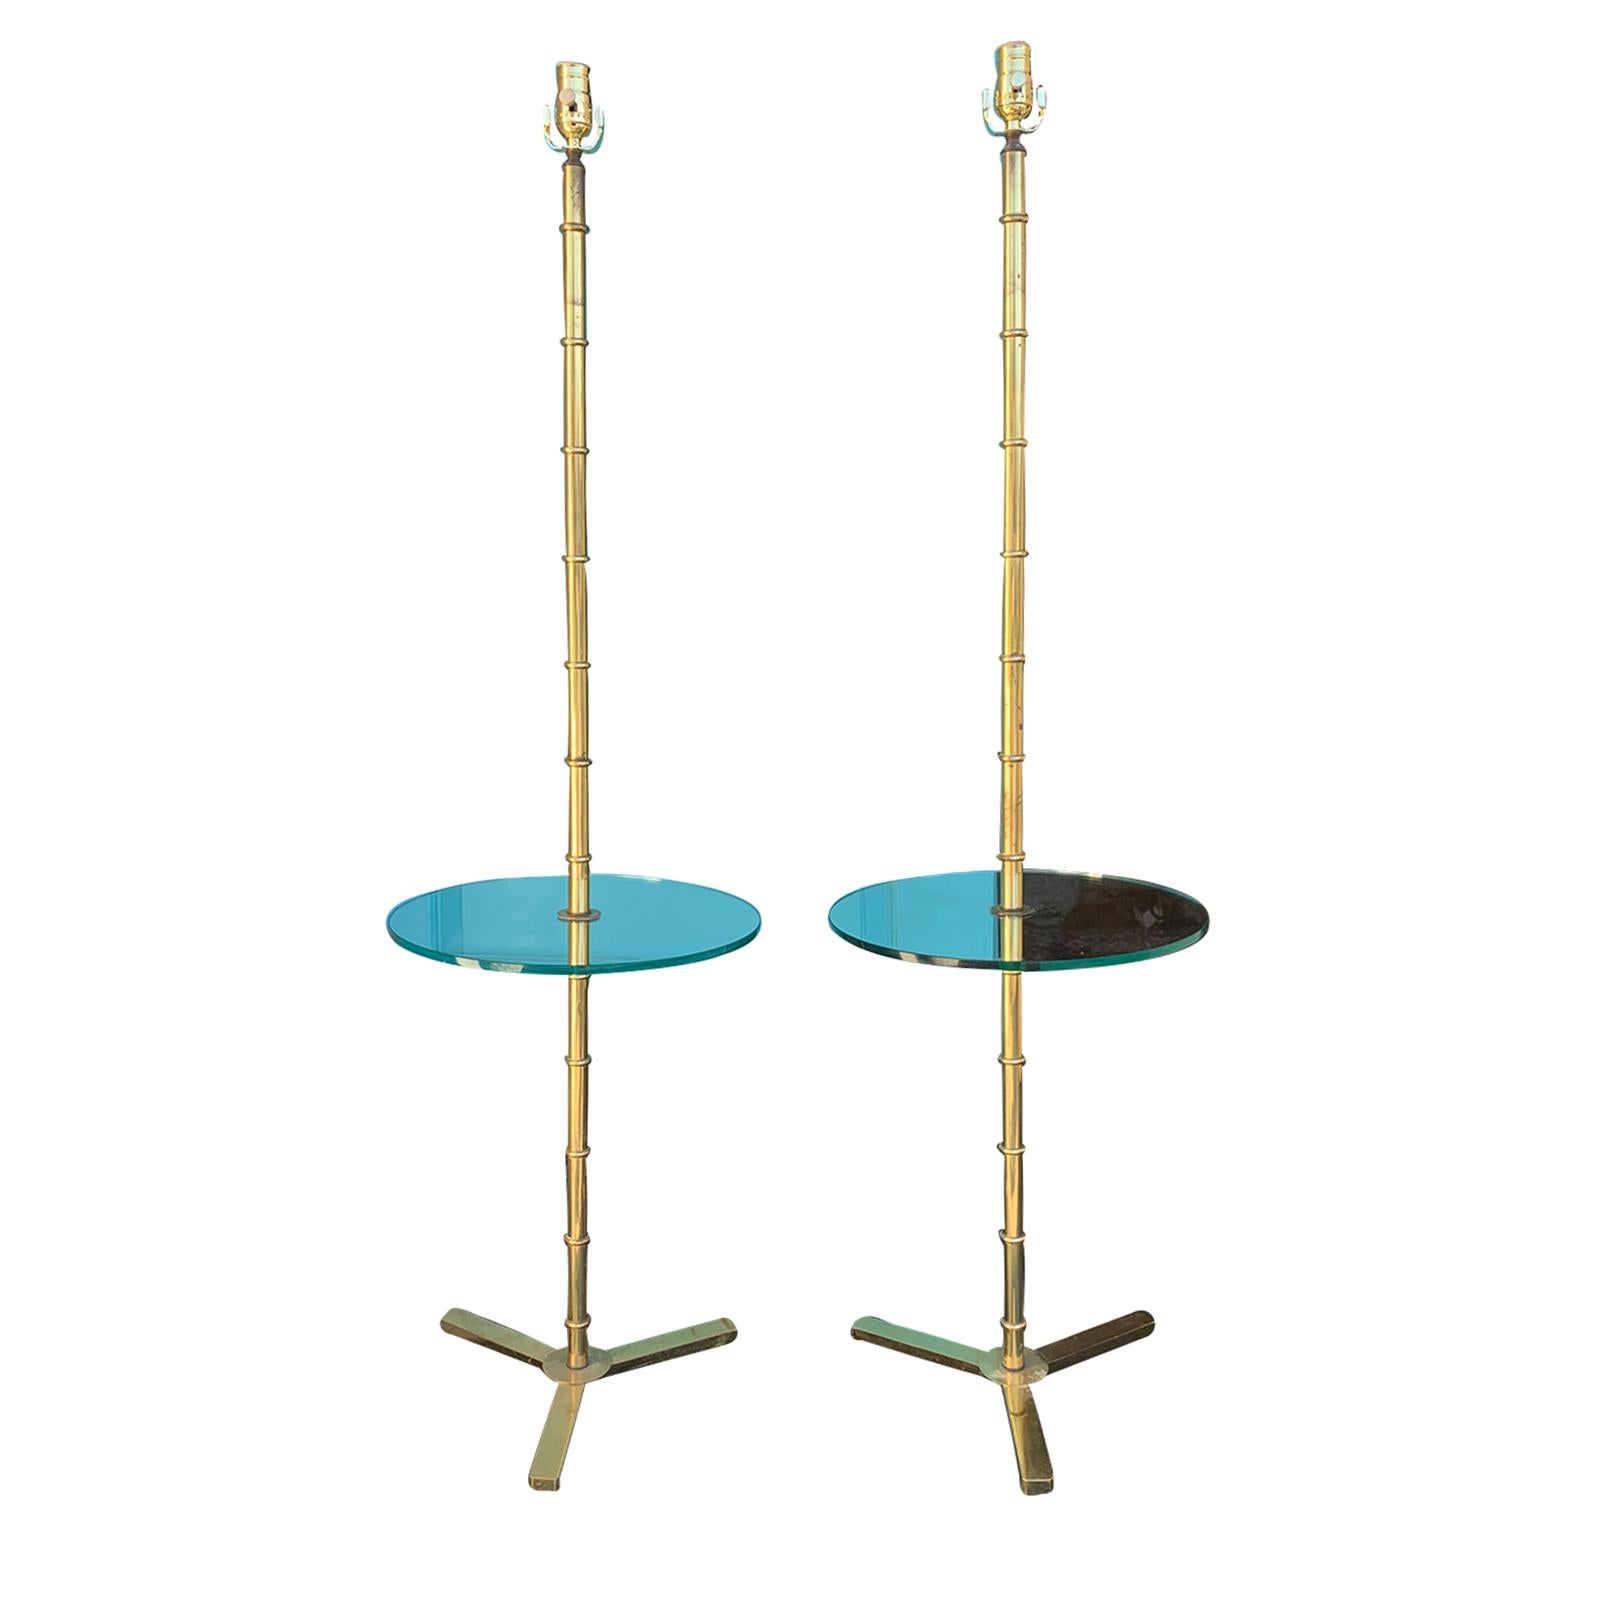 Pair of Brass Faux Bamboo and Glass Table Floor Lamps, circa 1970s